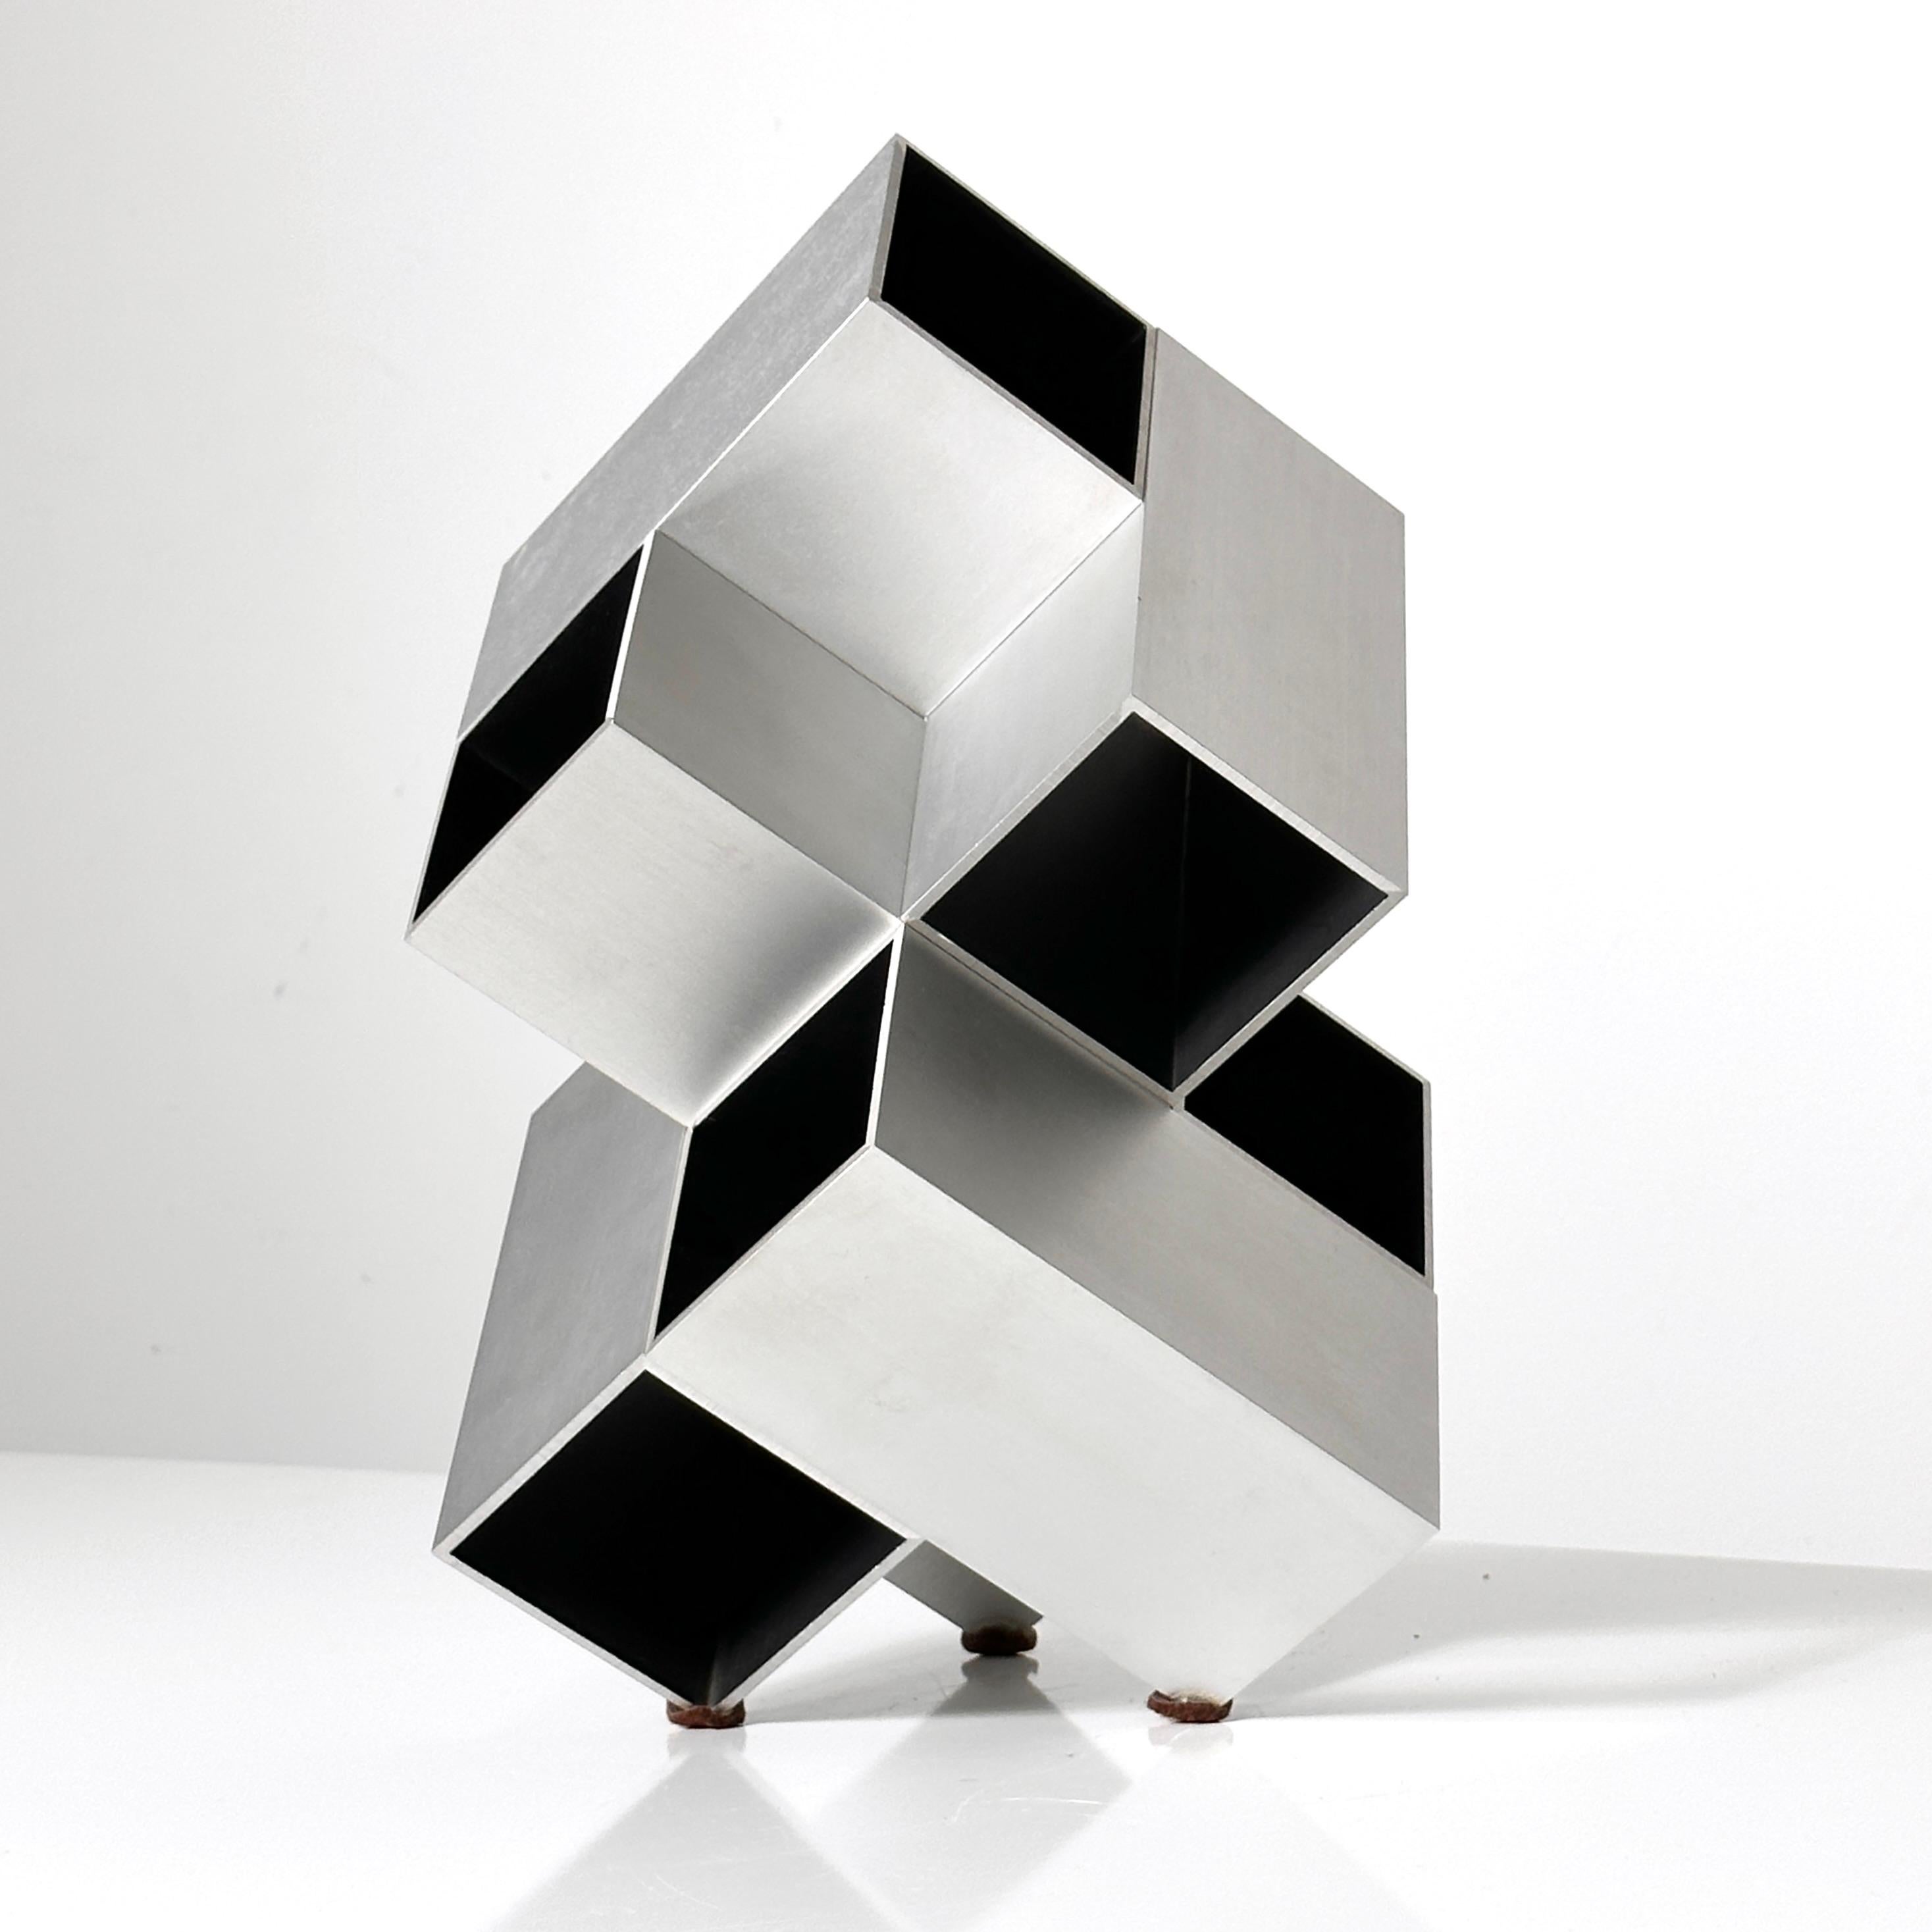 Modular Cube sculpture by Kosso Eloul Israeli artist 1920-1995
Sold in Toronto circa 1970s 
Brushed aluminum and black painted wood interior
Unsigned, which is typical as most were not. 

Kosso Eloul was born in the city of Murom, Russia. In